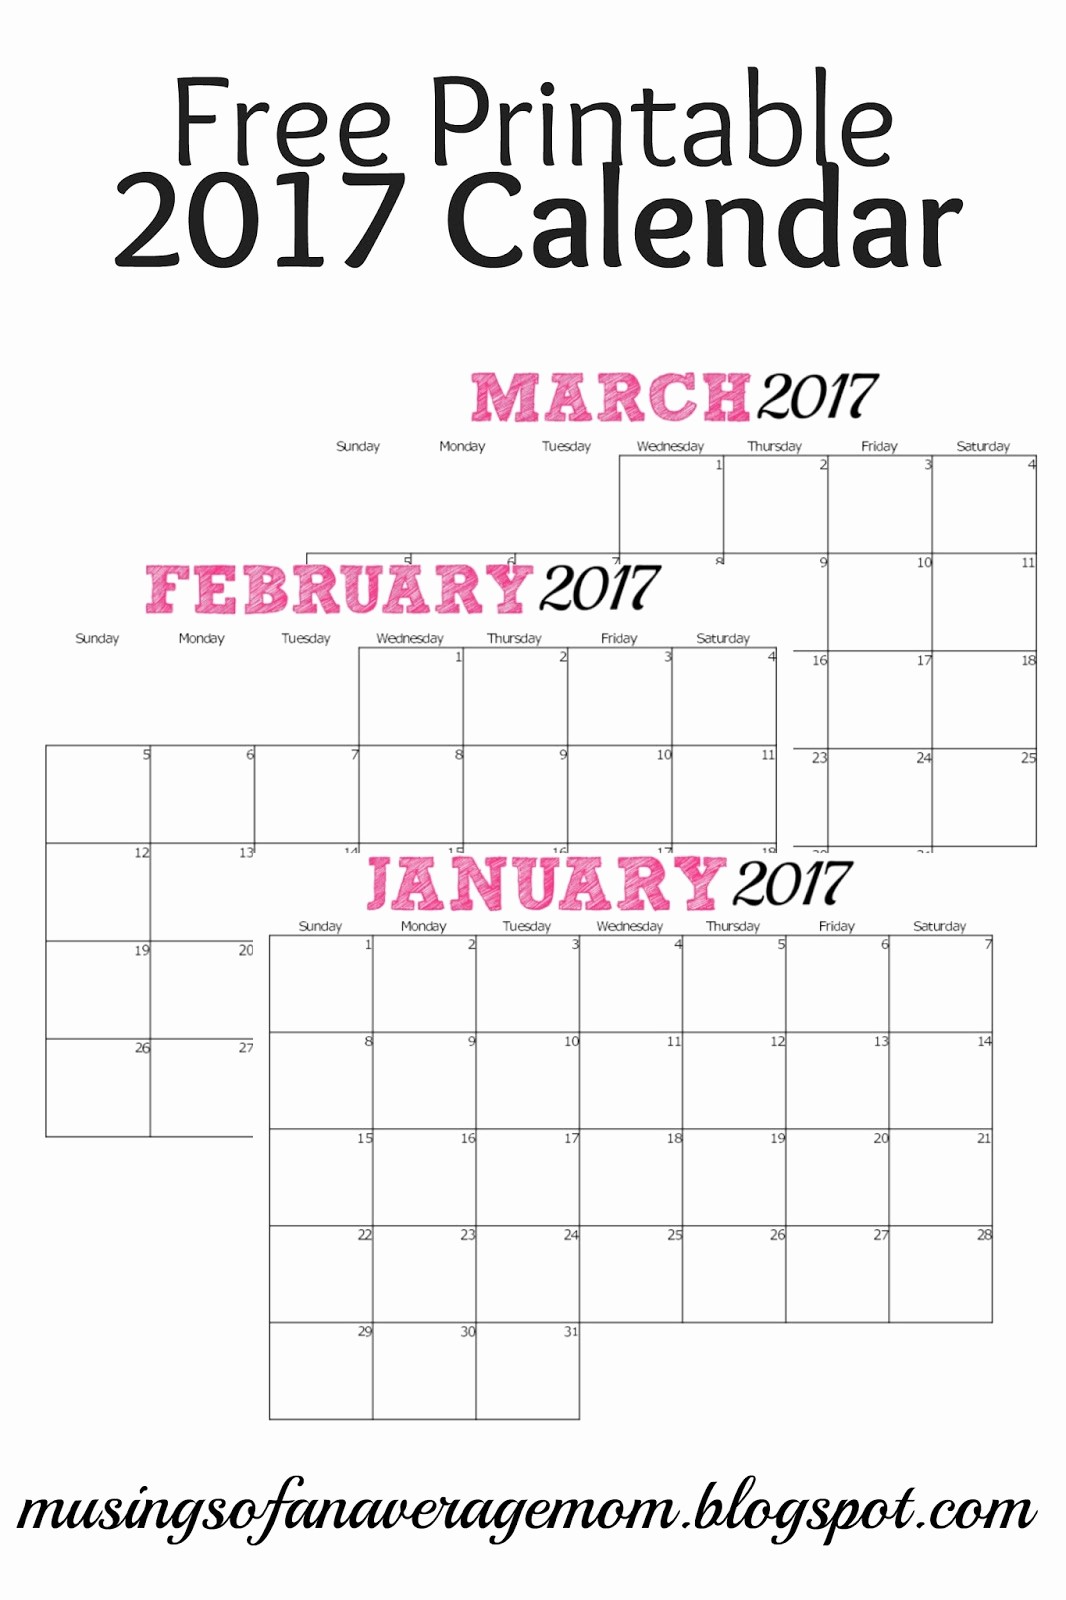 Free Printable Monthly 2017 Calendar Unique Musings Of An Average Mom 2017 Monthly Calendars